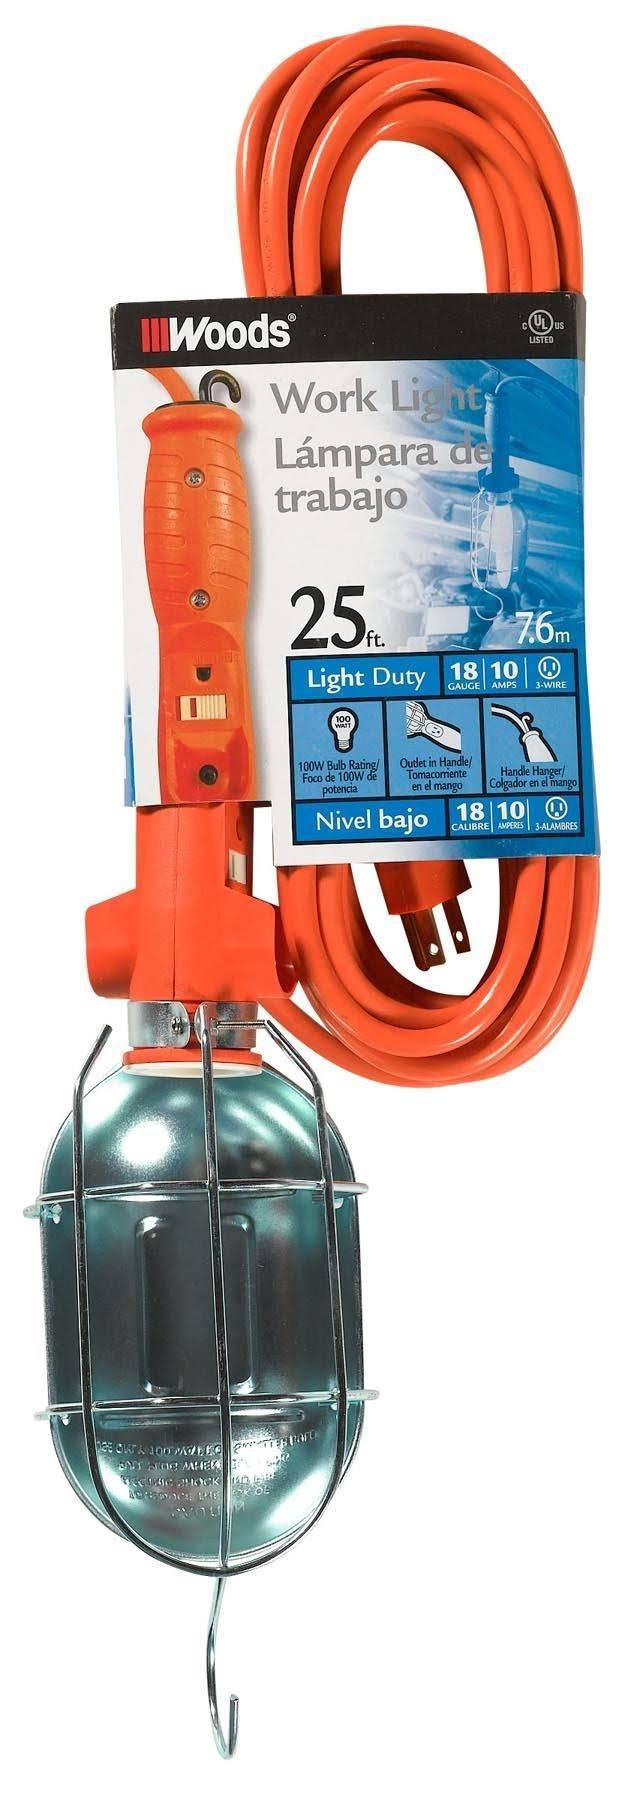 Woods SJTW Trouble Light with Metal Guard & Outlet - Orange